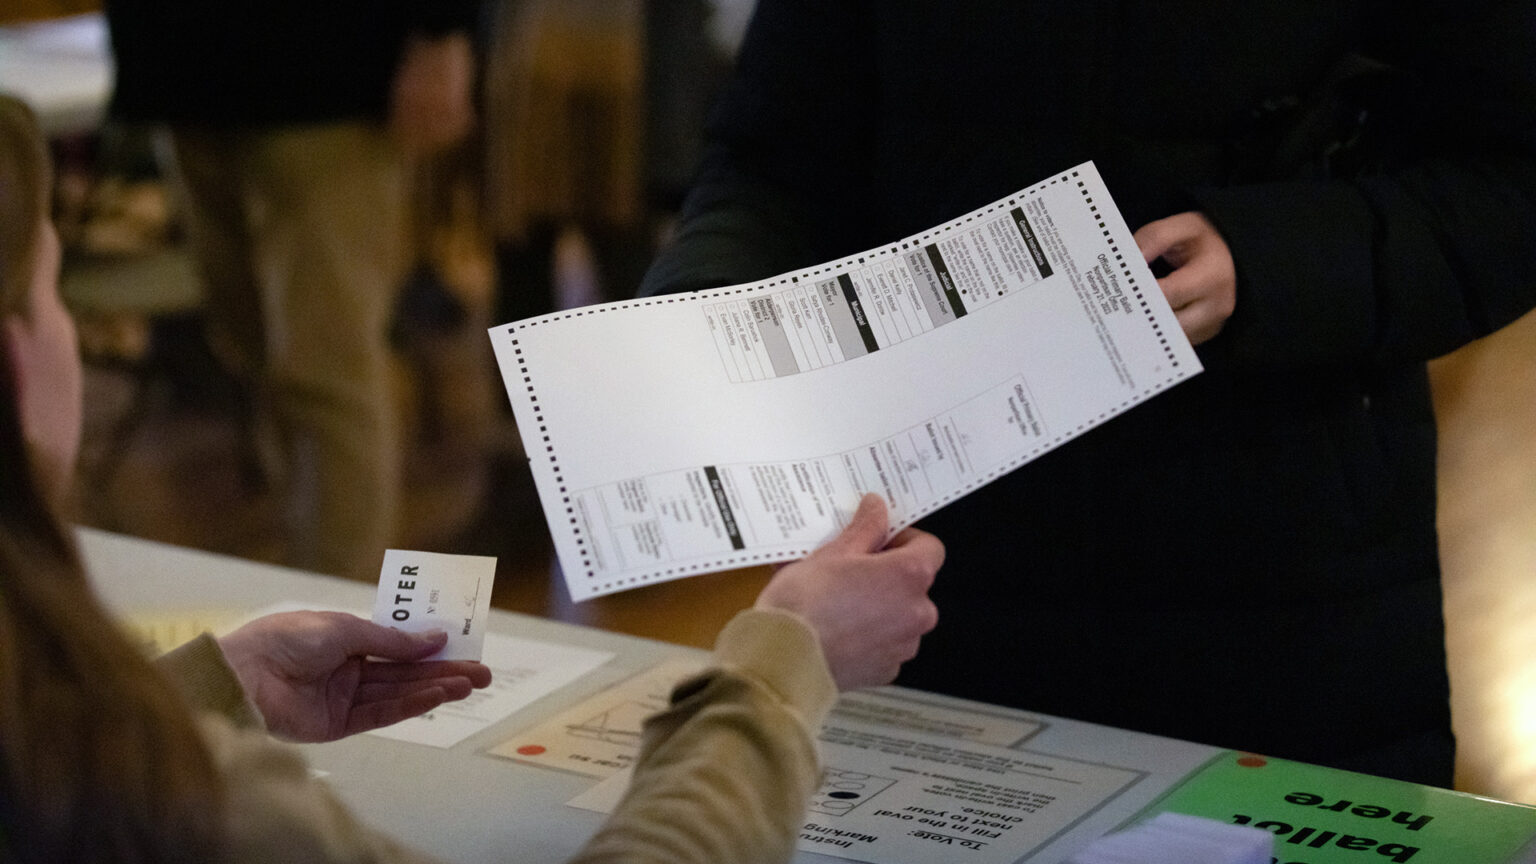 A seated person holds a voter slip in their left hand while passing a ballot in their right hand across a table to a person standing opposite them.